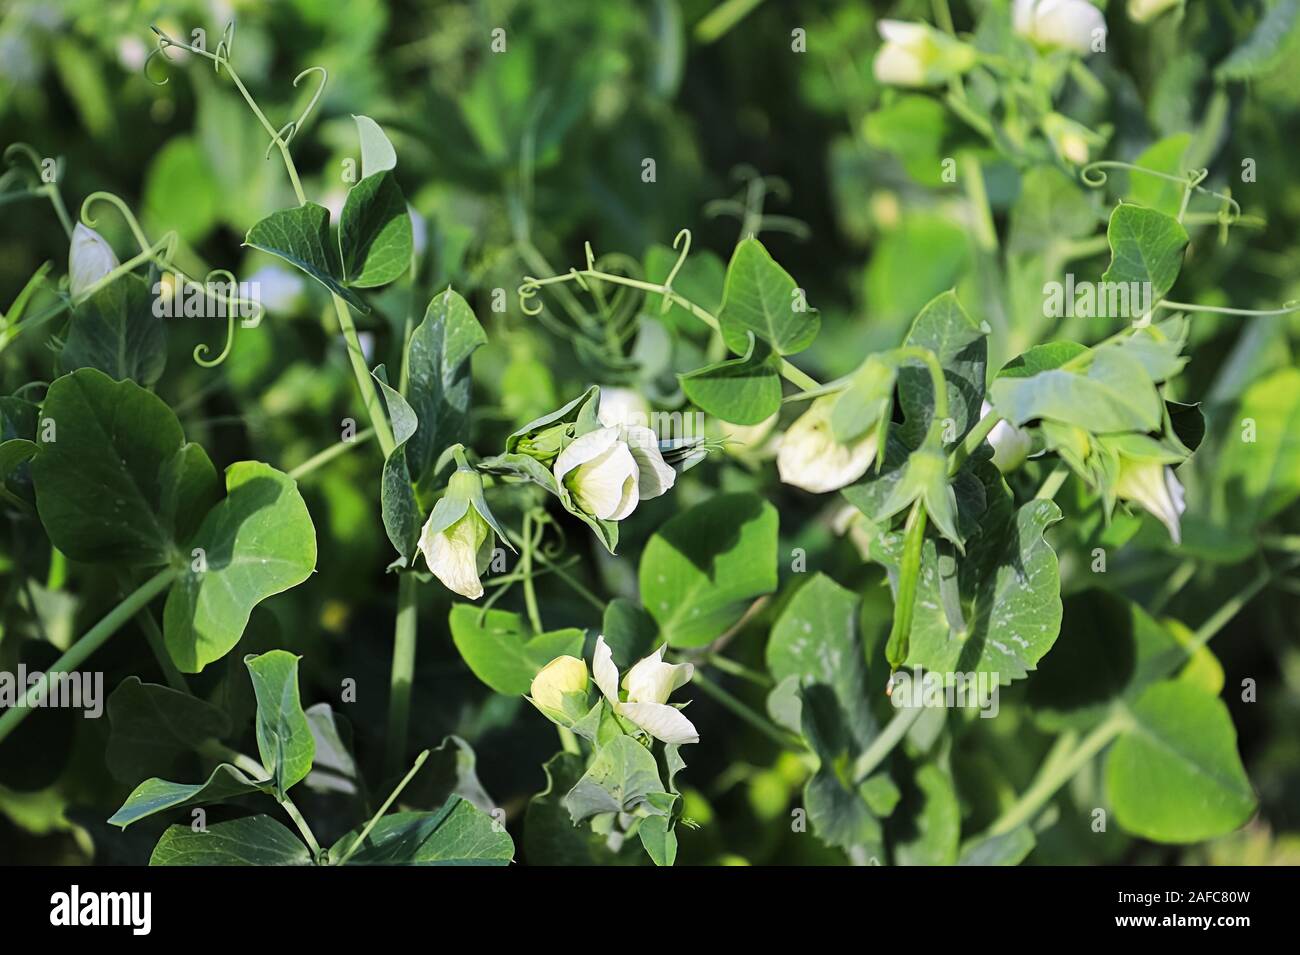 Various pea flowers growing in the spring garden Stock Photo